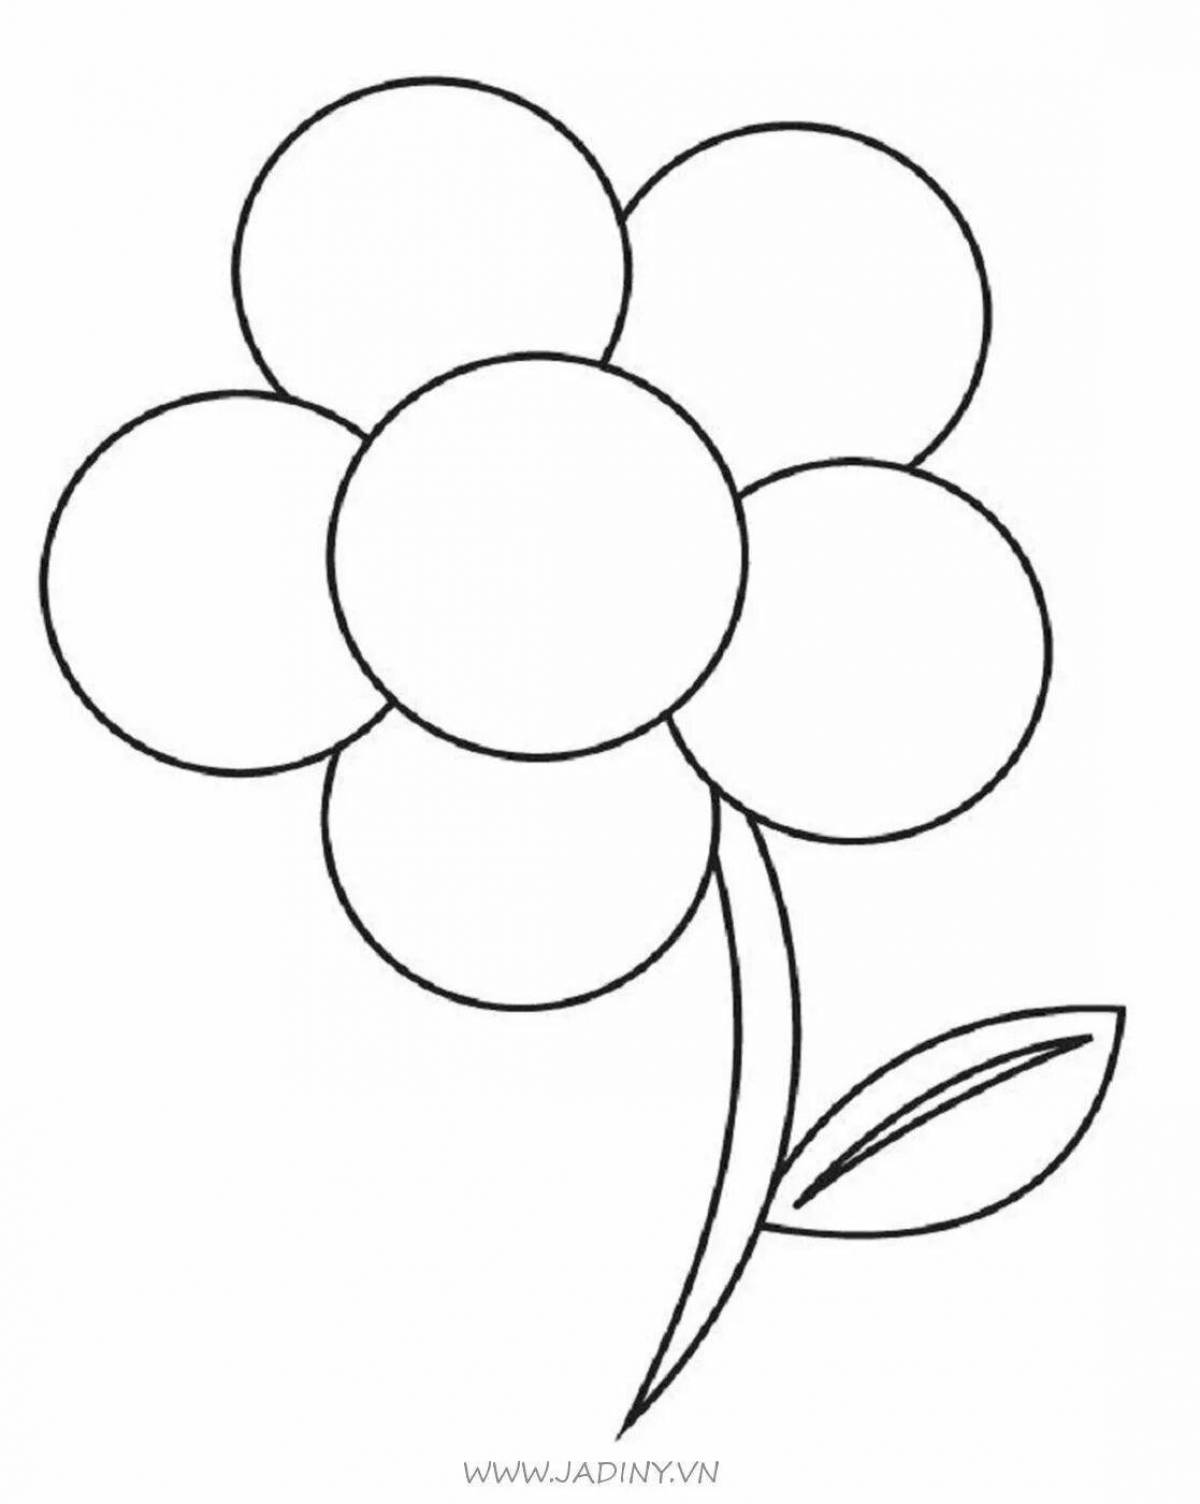 Sweet coloring flower for children 5 years old